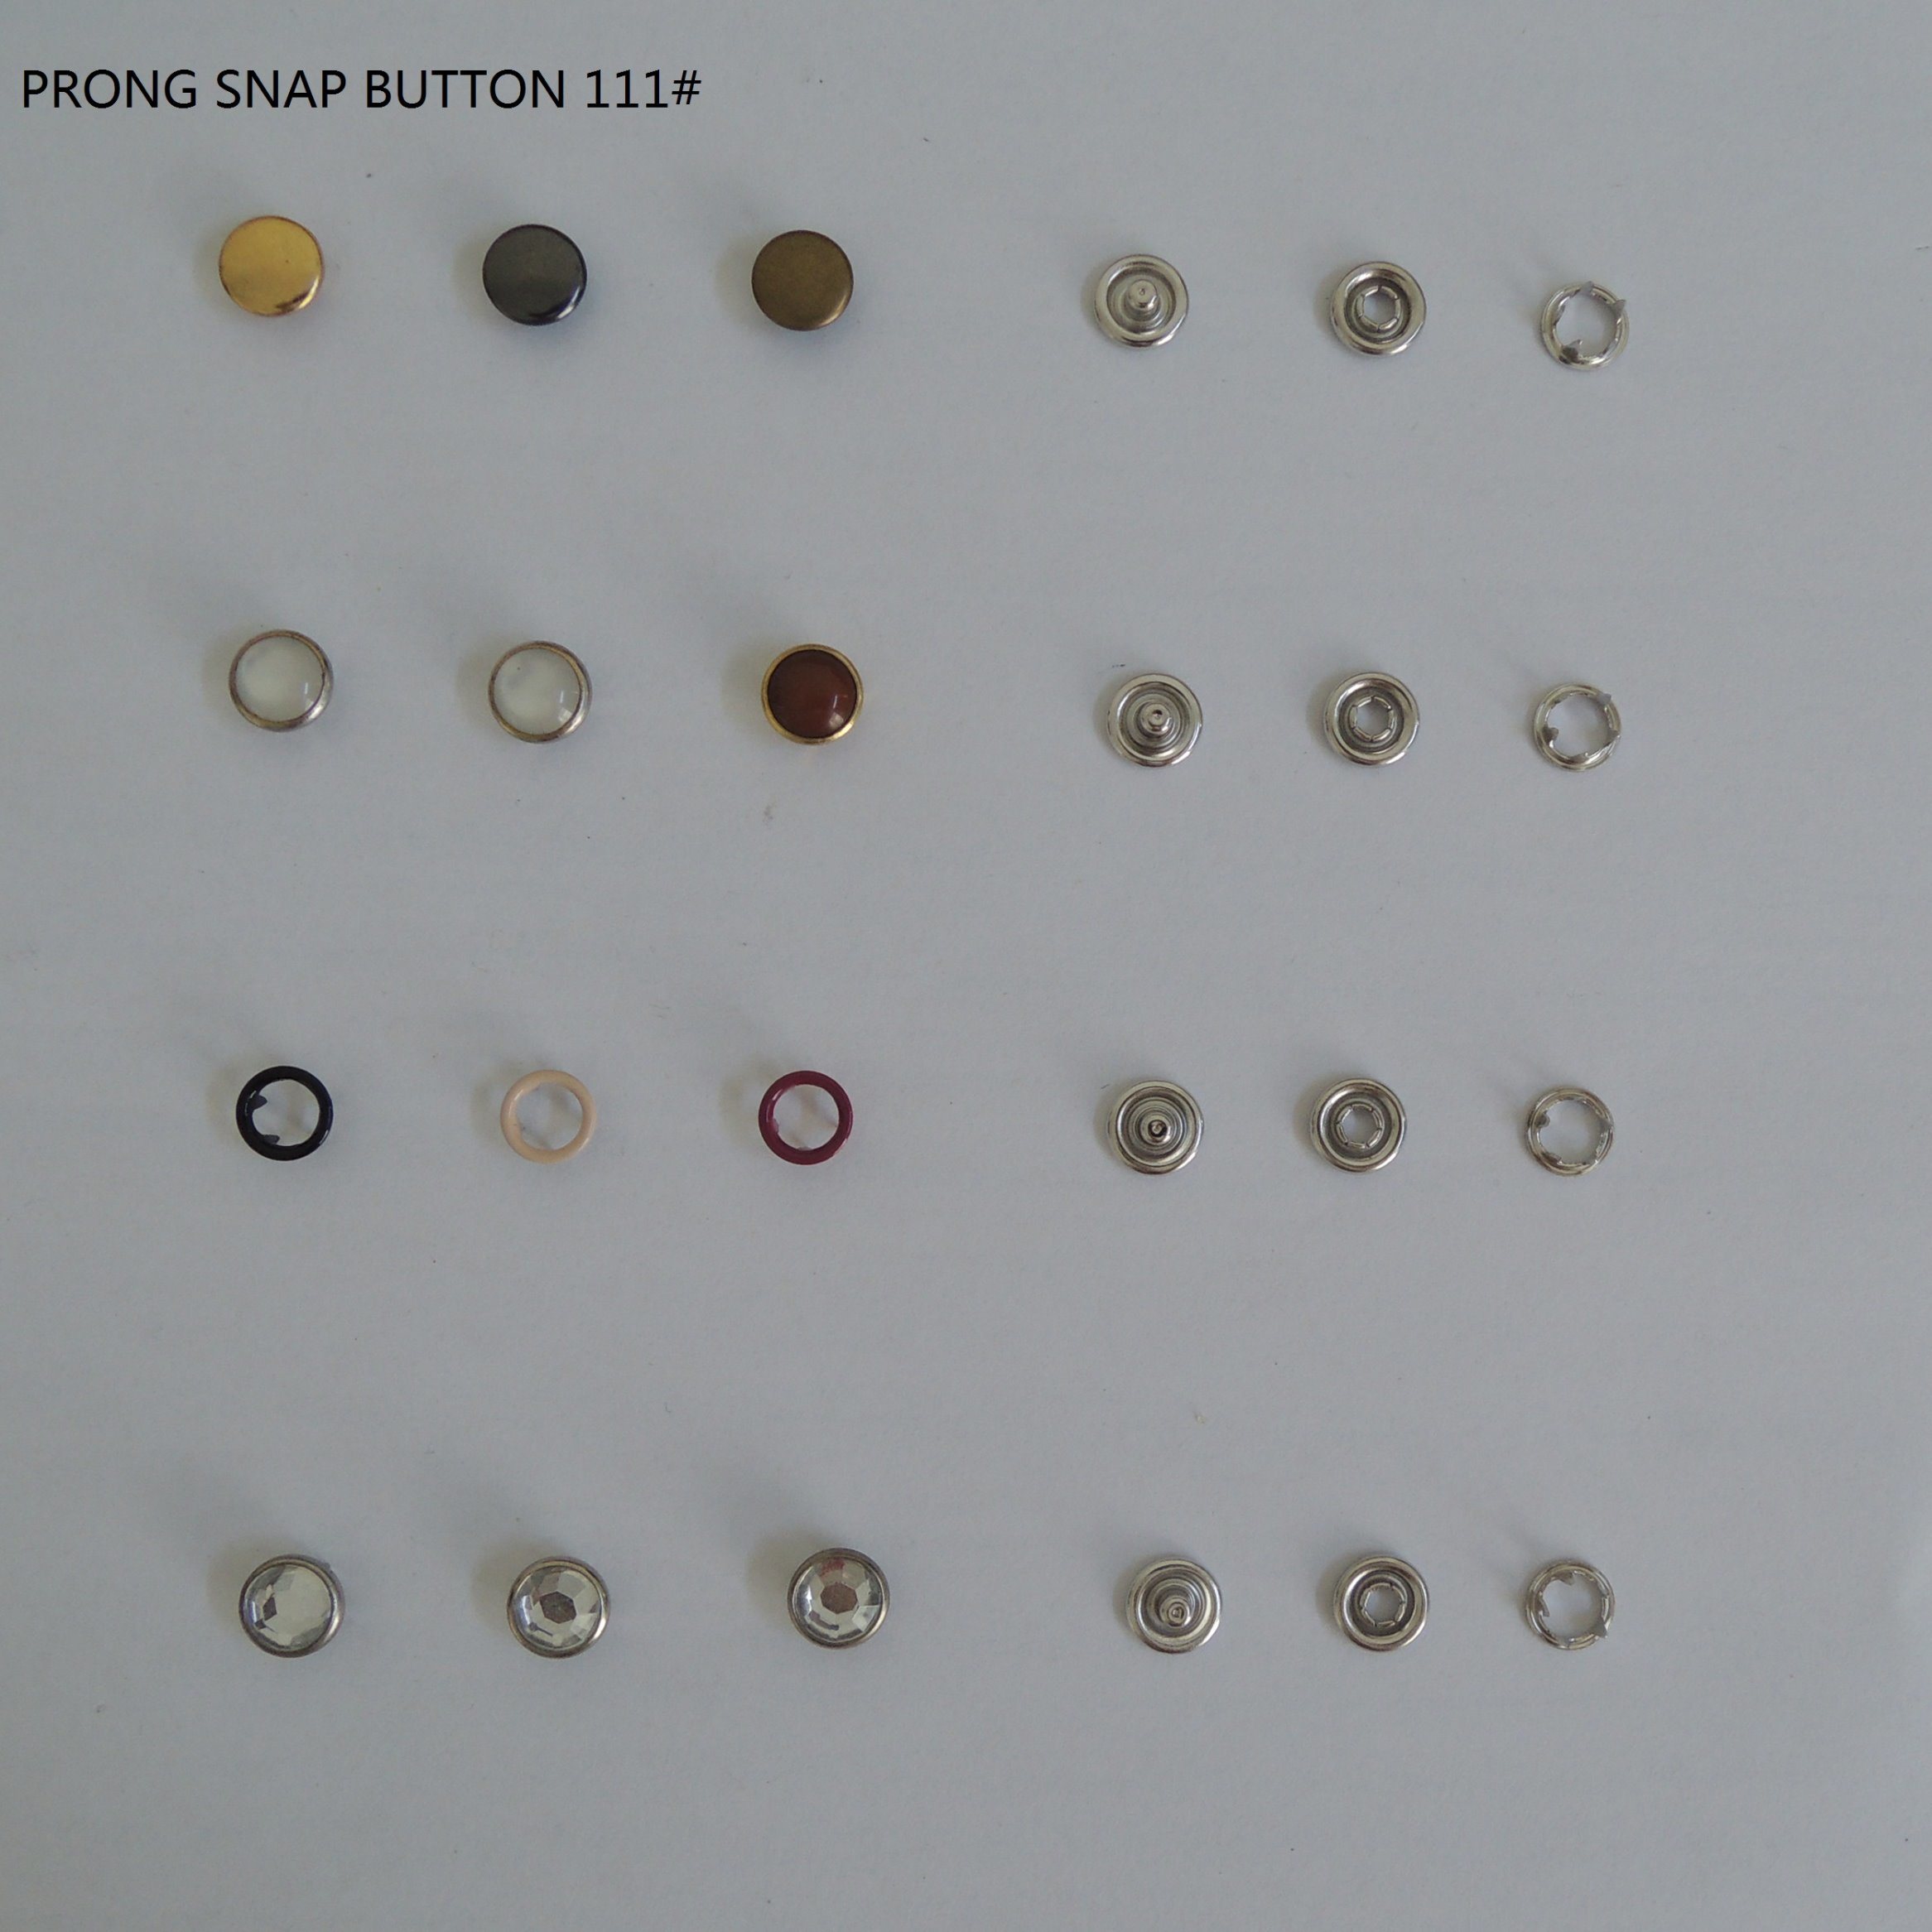 Colorful and Multiple Function Prong Snap Button (111#)